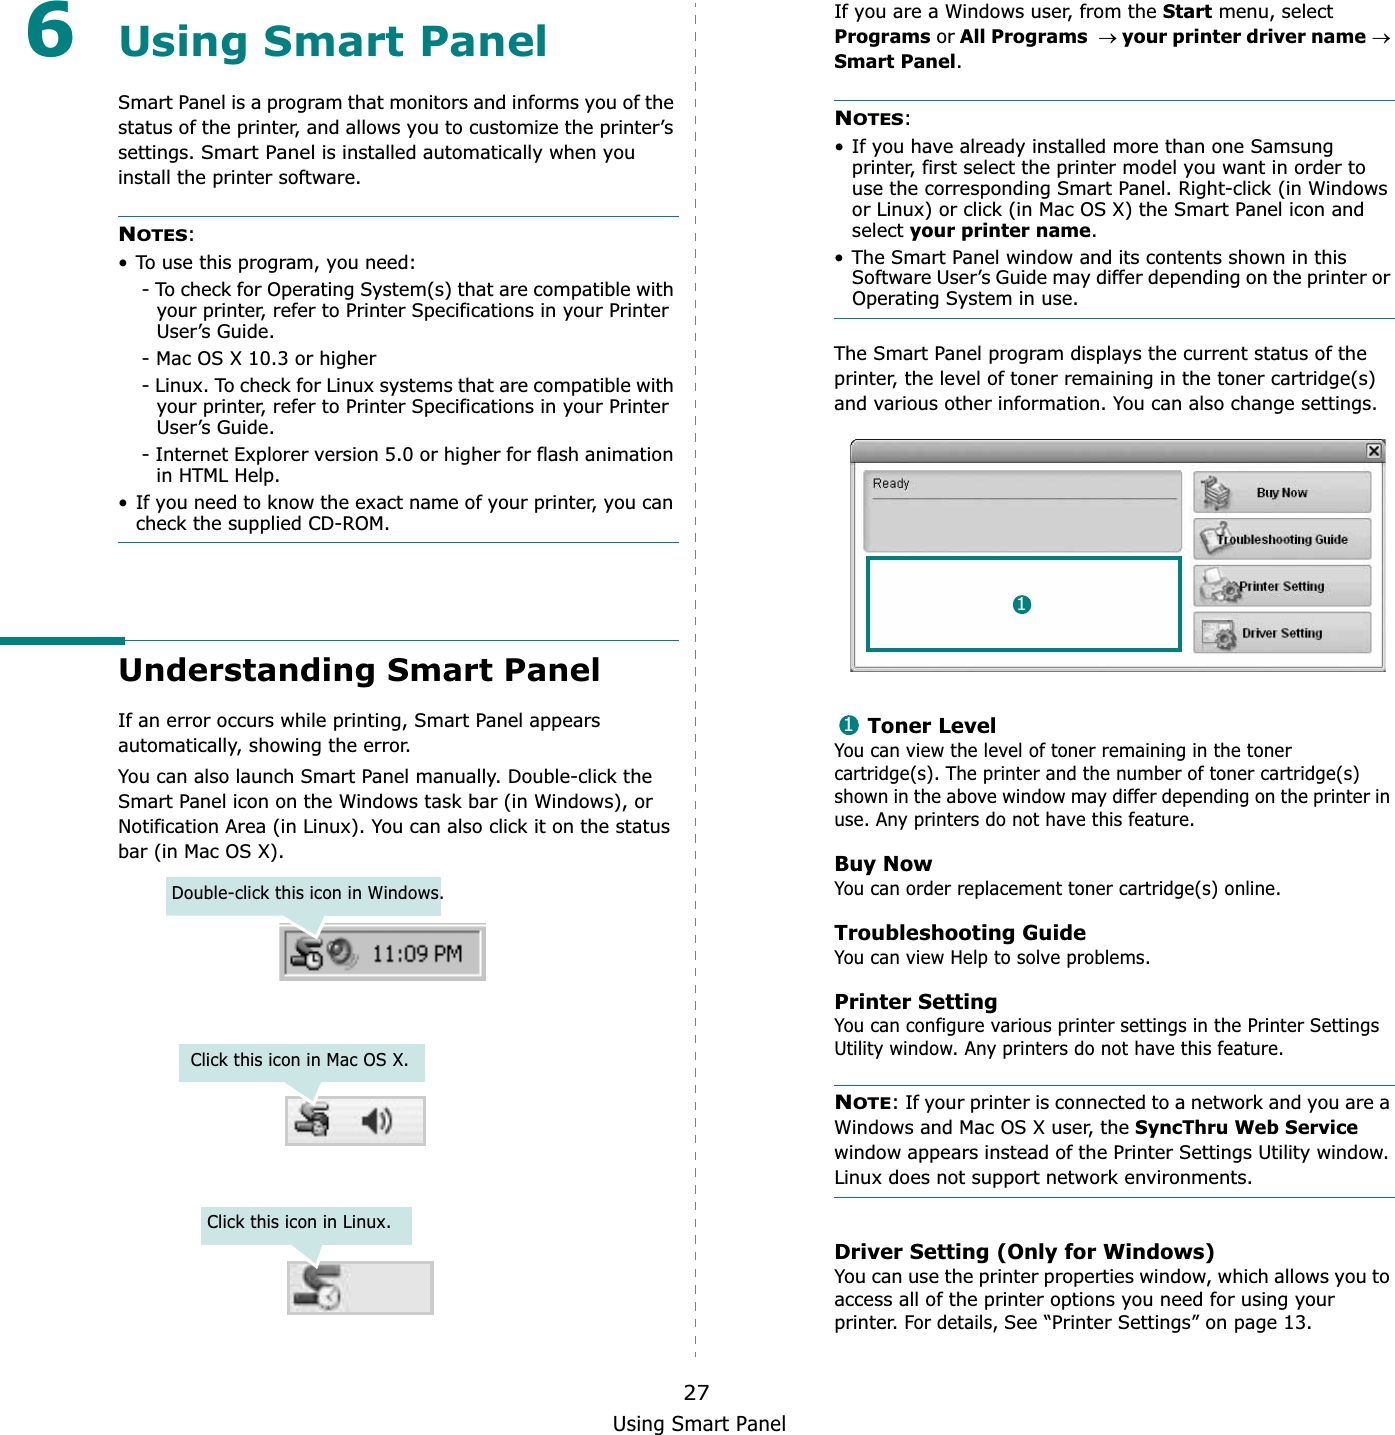 Using Smart Panel276Using Smart PanelSmart Panel is a program that monitors and informs you of the status of the printer, and allows you to customize the printer’s settings.Smart Panel is installed automatically when you install the printer software.NOTES:• To use this program, you need:- To check for Operating System(s) that are compatible with your printer, refer to Printer Specifications in your Printer User’s Guide.- Mac OS X 10.3 or higher- Linux. To check for Linux systems that are compatible with your printer, refer to Printer Specifications in your Printer User’s Guide.- Internet Explorer version 5.0 or higher for flash animation in HTML Help.• If you need to know the exact name of your printer, you can check the supplied CD-ROM.Understanding Smart PanelIf an error occurs while printing, Smart Panel appears automatically, showing the error.You can also launch Smart Panel manually. Double-click the Smart Panel icon on the Windows task bar (in Windows), or Notification Area (in Linux). You can also click it on the status bar (in Mac OS X).Double-click this icon in Windows.Click this icon in Mac OS X.Click this icon in Linux.If you are a Windows user, from the Start menu, select Programs or All Programsoyour printer driver nameoSmart Panel.NOTES:• If you have already installed more than one Samsung printer, first select the printer model you want in order to use the corresponding Smart Panel. Right-click (in Windows or Linux) or click (in Mac OS X) the Smart Panel icon and select your printer name.• The Smart Panel window and its contents shown in this Software User’s Guide may differ depending on the printer or Operating System in use.The Smart Panel program displays the current status of the printer, the level of toner remaining in the toner cartridge(s) and various other information. You can also change settings.Toner LevelYou can view the level of toner remaining in the toner cartridge(s). The printer and the number of toner cartridge(s) shown in the above window may differ depending on the printer in use. Any printers do not have this feature.Buy NowYou can order replacement toner cartridge(s) online.Troubleshooting GuideYou can view Help to solve problems.Printer SettingYou can configure various printer settings in the Printer Settings Utility window. Any printers do not have this feature.NOTE: If your printer is connected to a network and you are a Windows and Mac OS X user, the SyncThru Web Servicewindow appears instead of the Printer Settings Utility window. Linux does not support network environments.Driver Setting (Only for Windows)You can use the printer properties window, which allows you to access all of the printer options you need for using your printer. For details, See “Printer Settings” on page 13.11